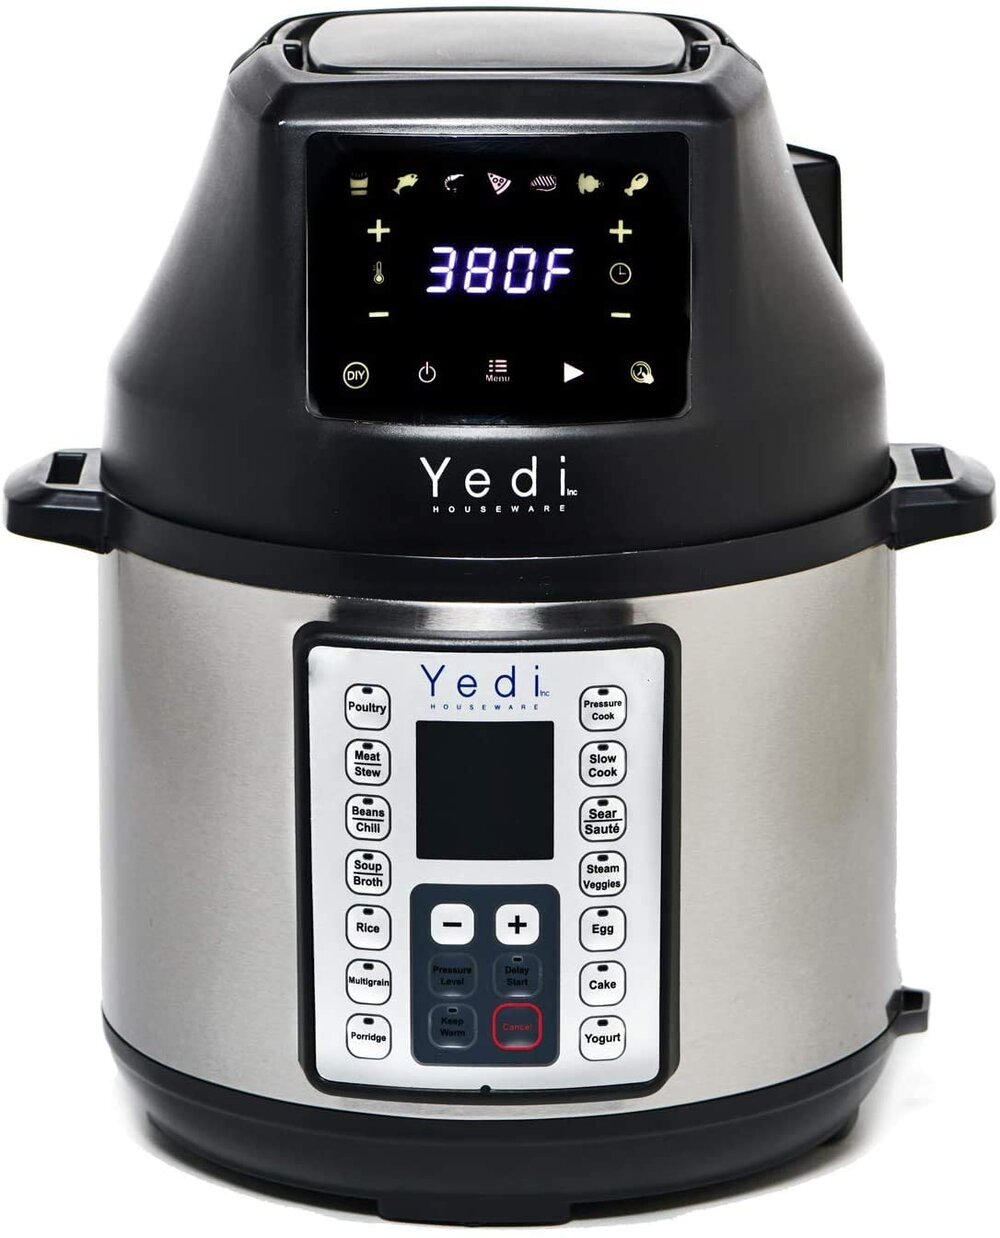  Thomson TFPC607 9-in-1 Pressure Cooker and Air Fryer